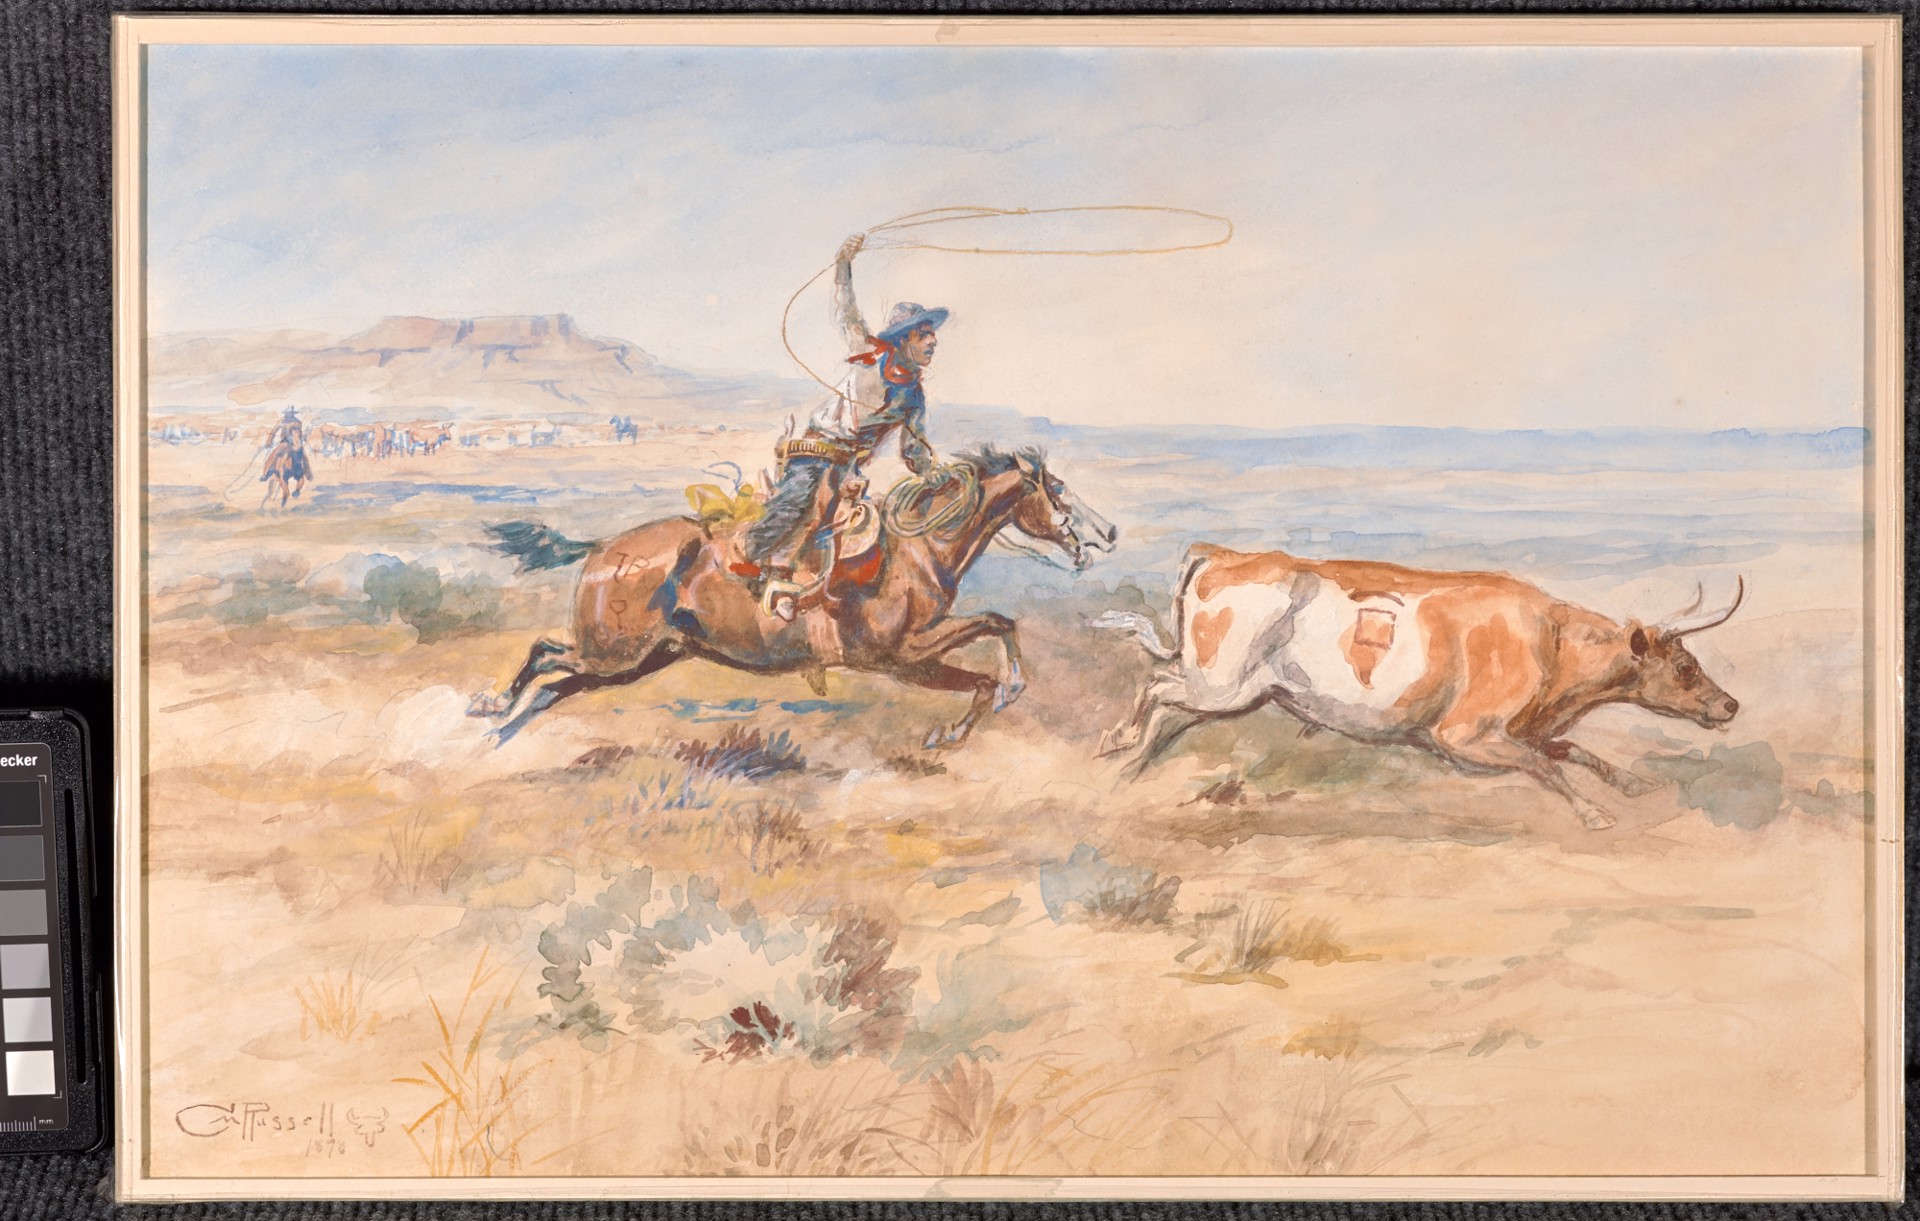 Roping a Steer by Charles M. Russell